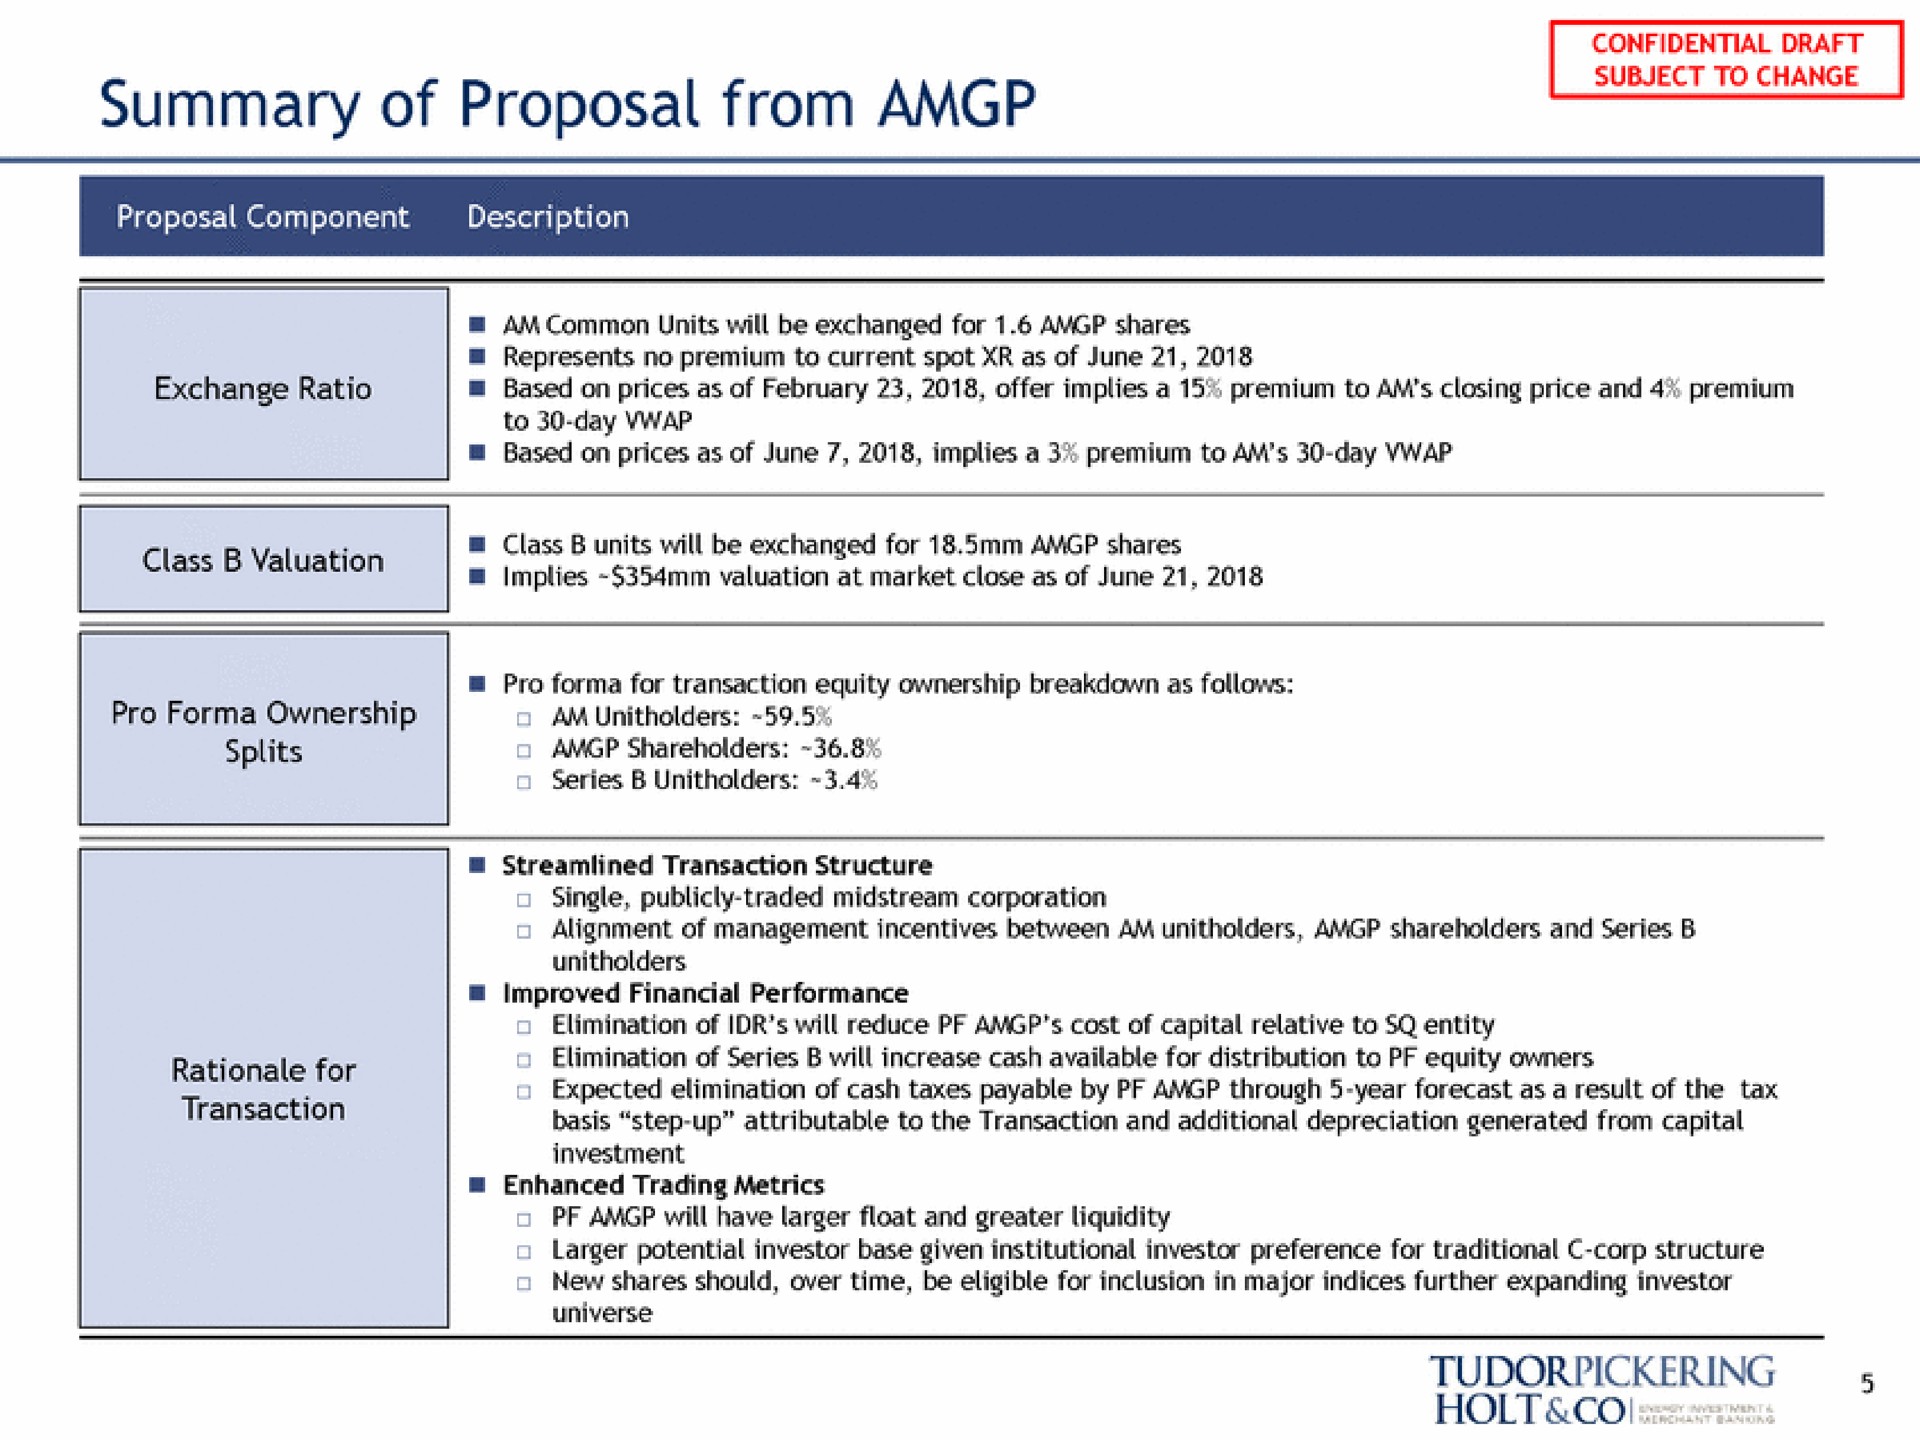 summary of proposal from holt | Tudor, Pickering, Holt & Co